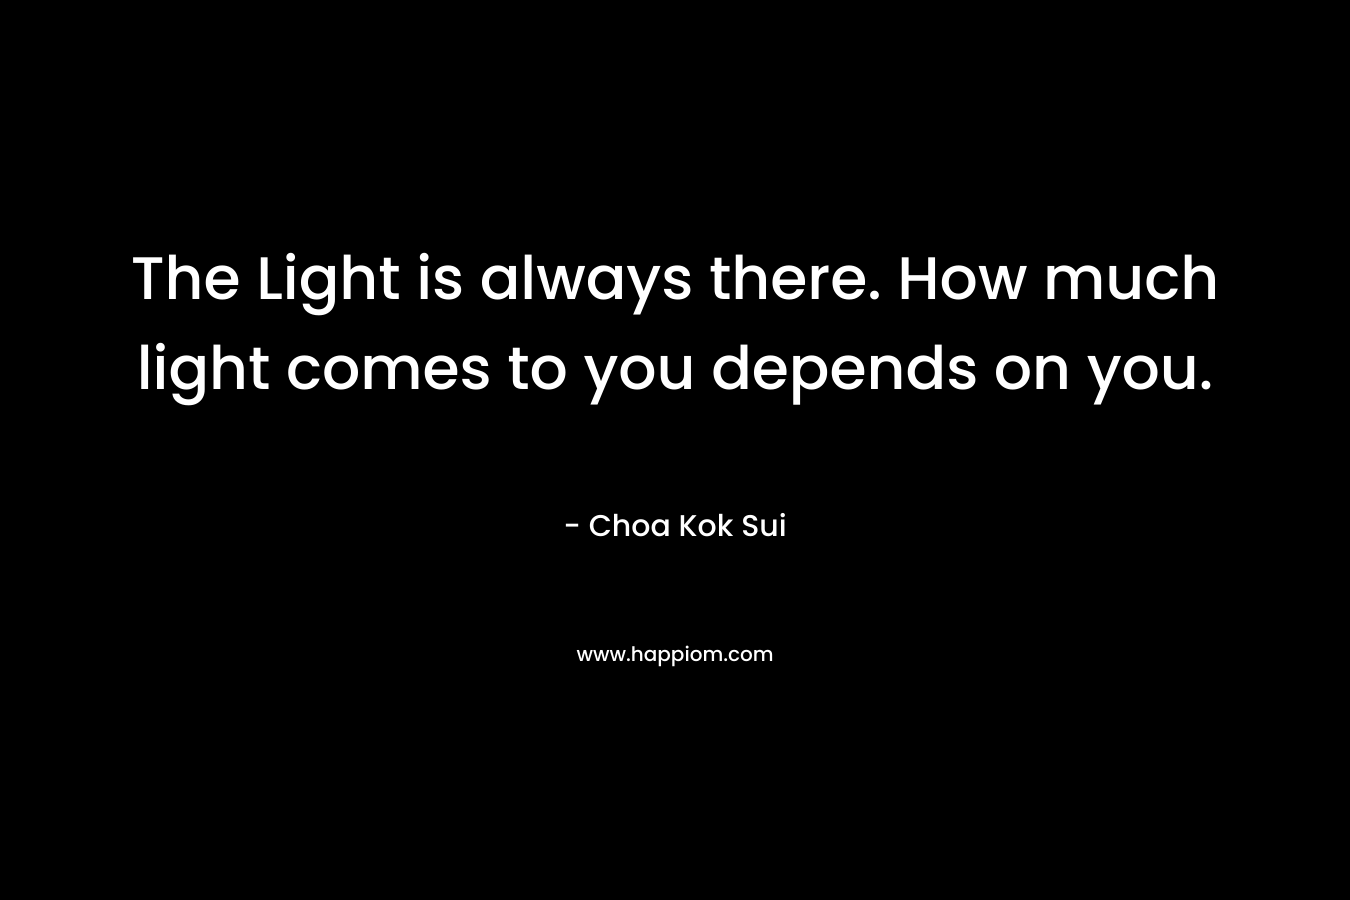 The Light is always there. How much light comes to you depends on you.